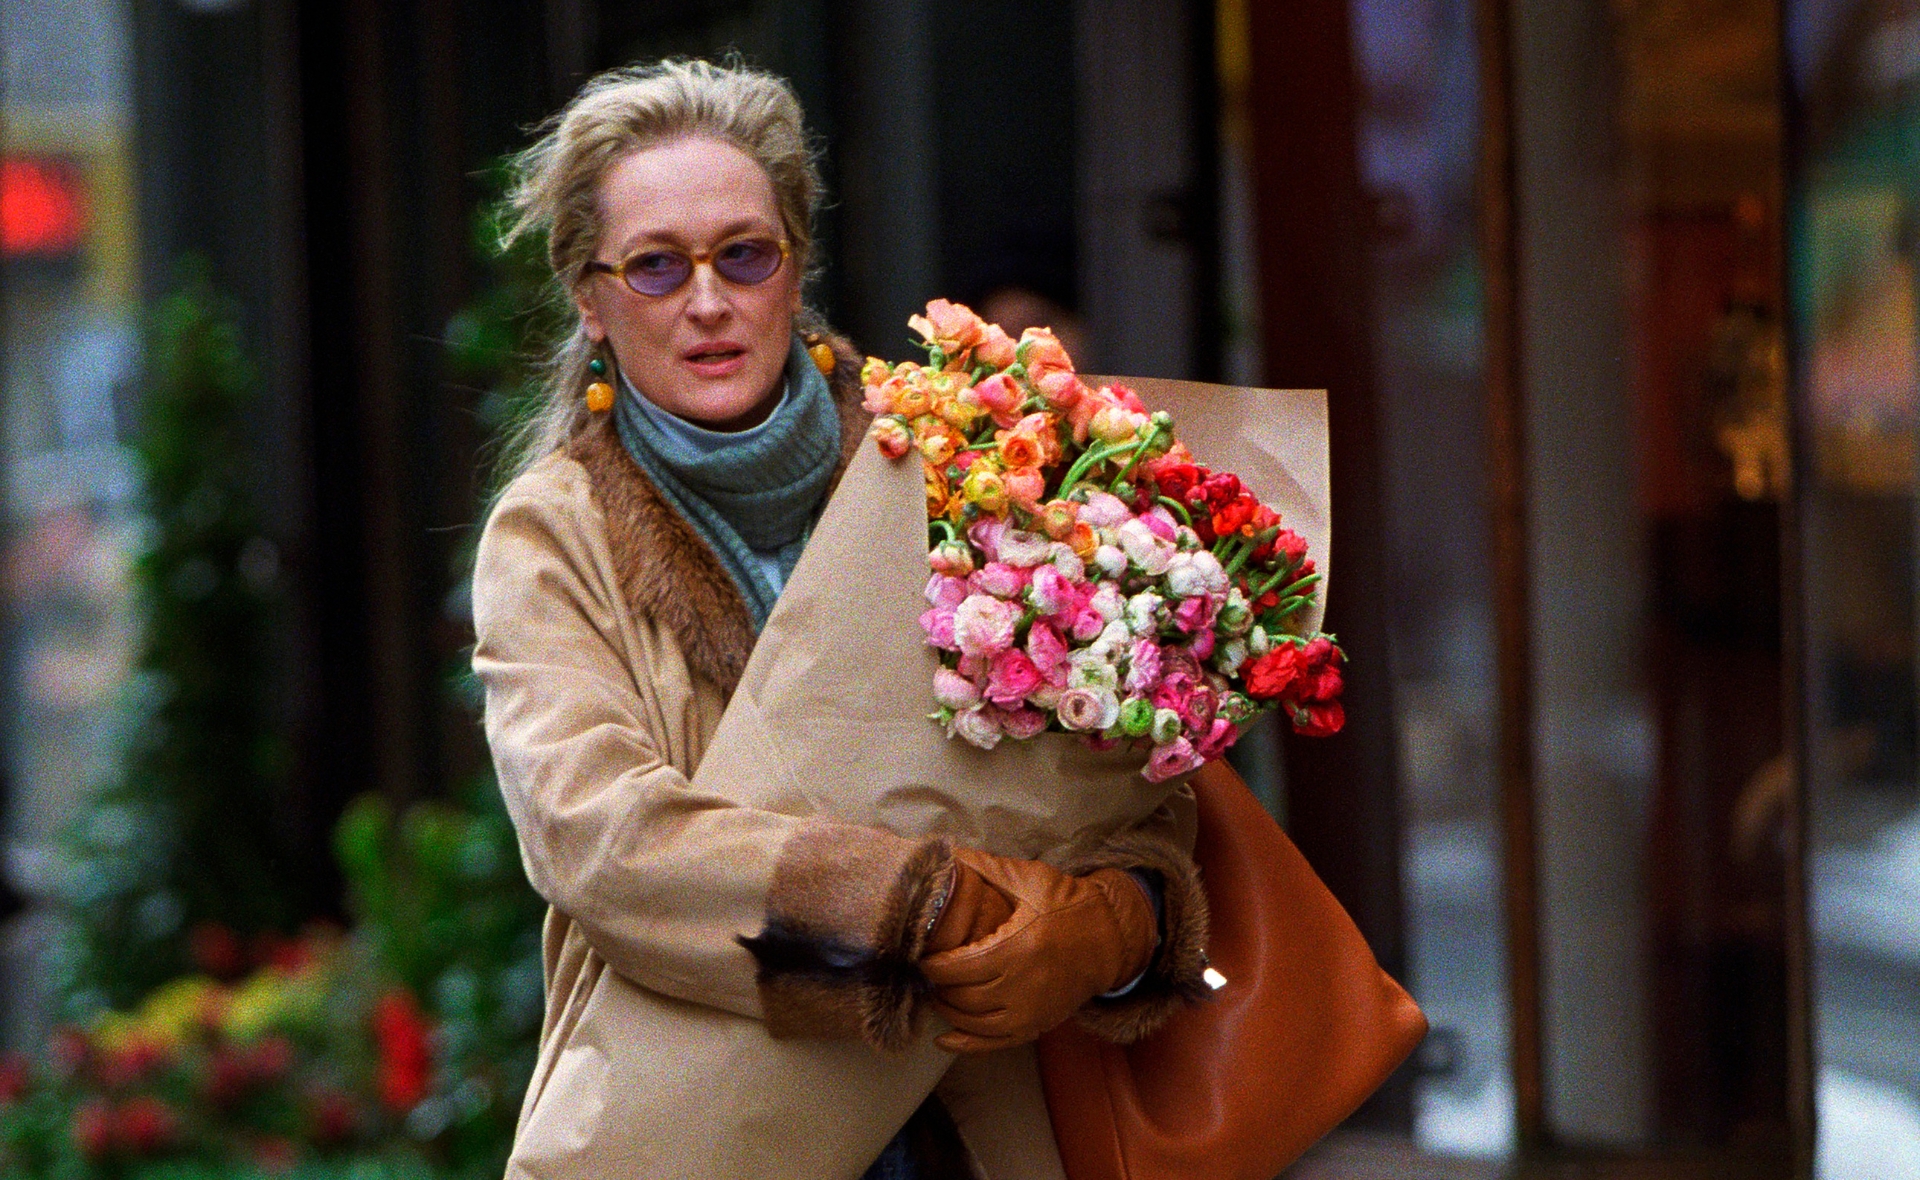 The best flower delivery services to help you say “I love you”, this Mother’s Day